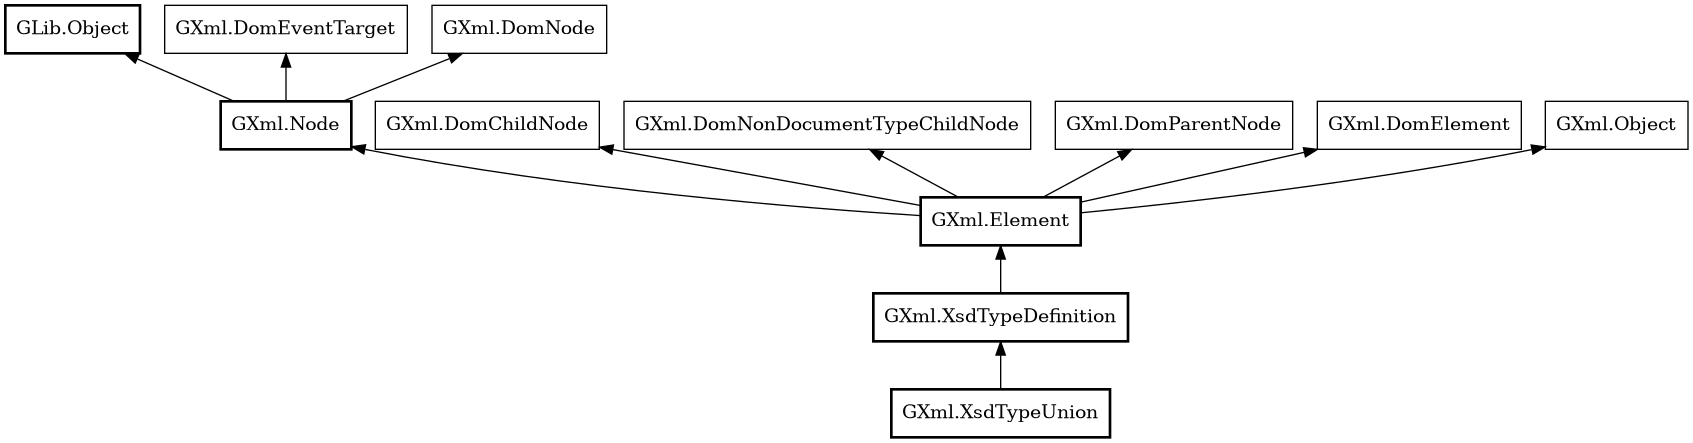 Object hierarchy for XsdTypeUnion